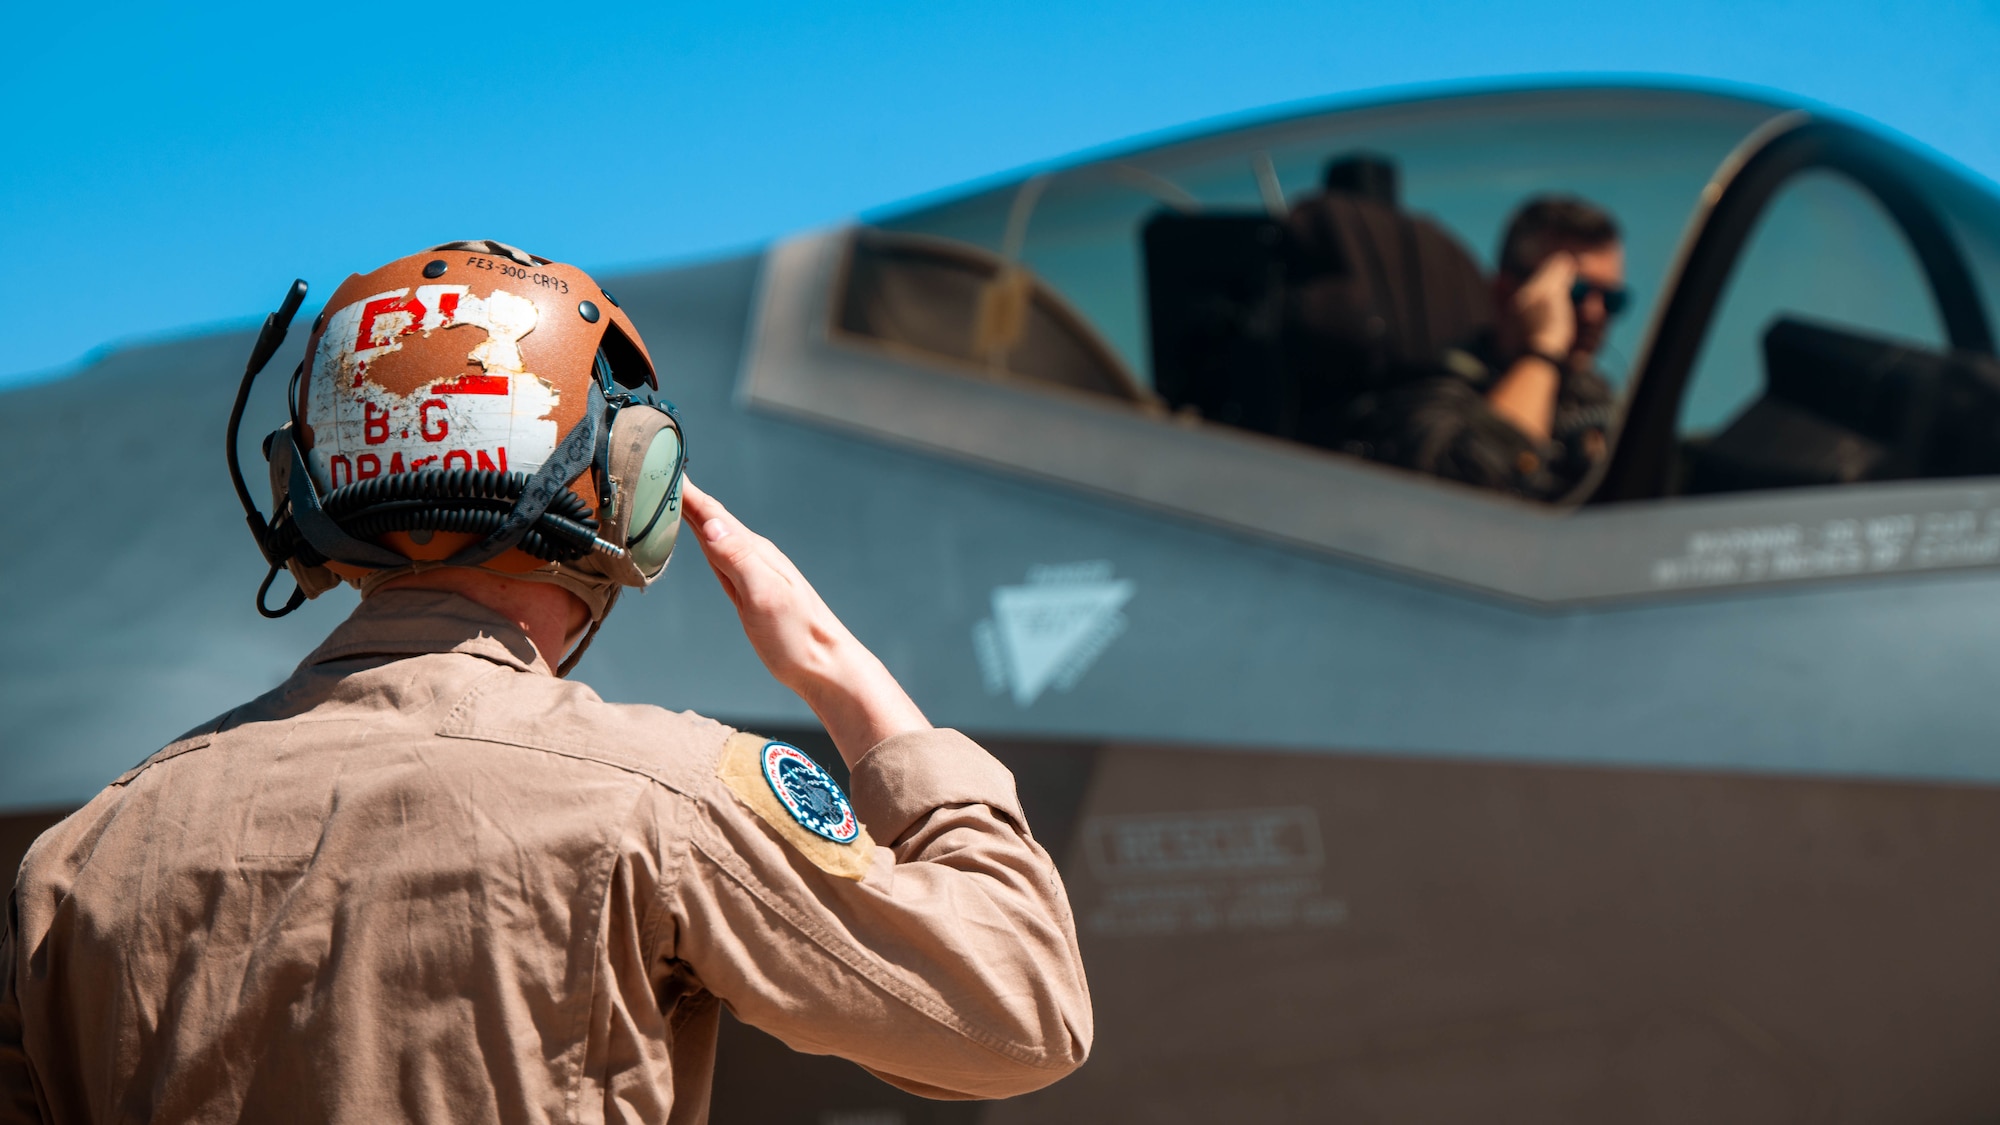 U.S. Marine Corps F-35C Lightning II plane captains from Marine Corps Air Station Yuma participated in hot pit refueling training for F-35A aircraft